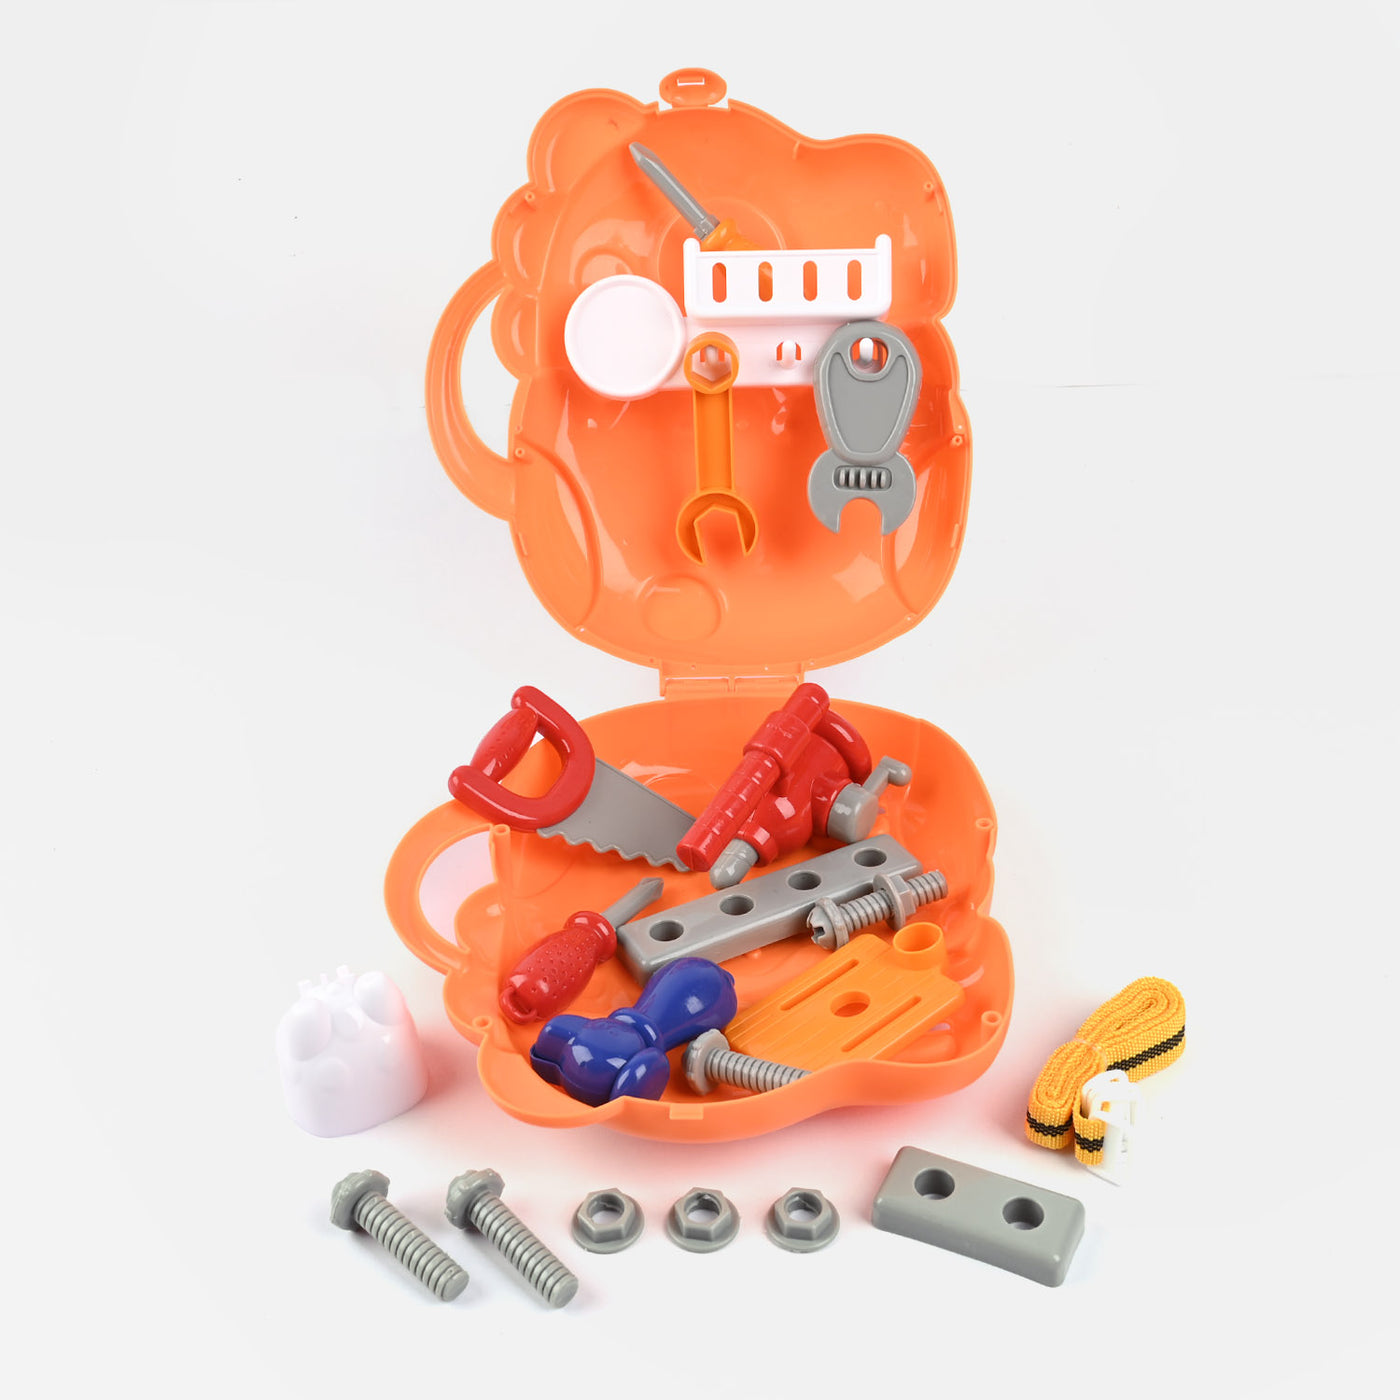 3-In-1 Play Construction Tool Set For Kids